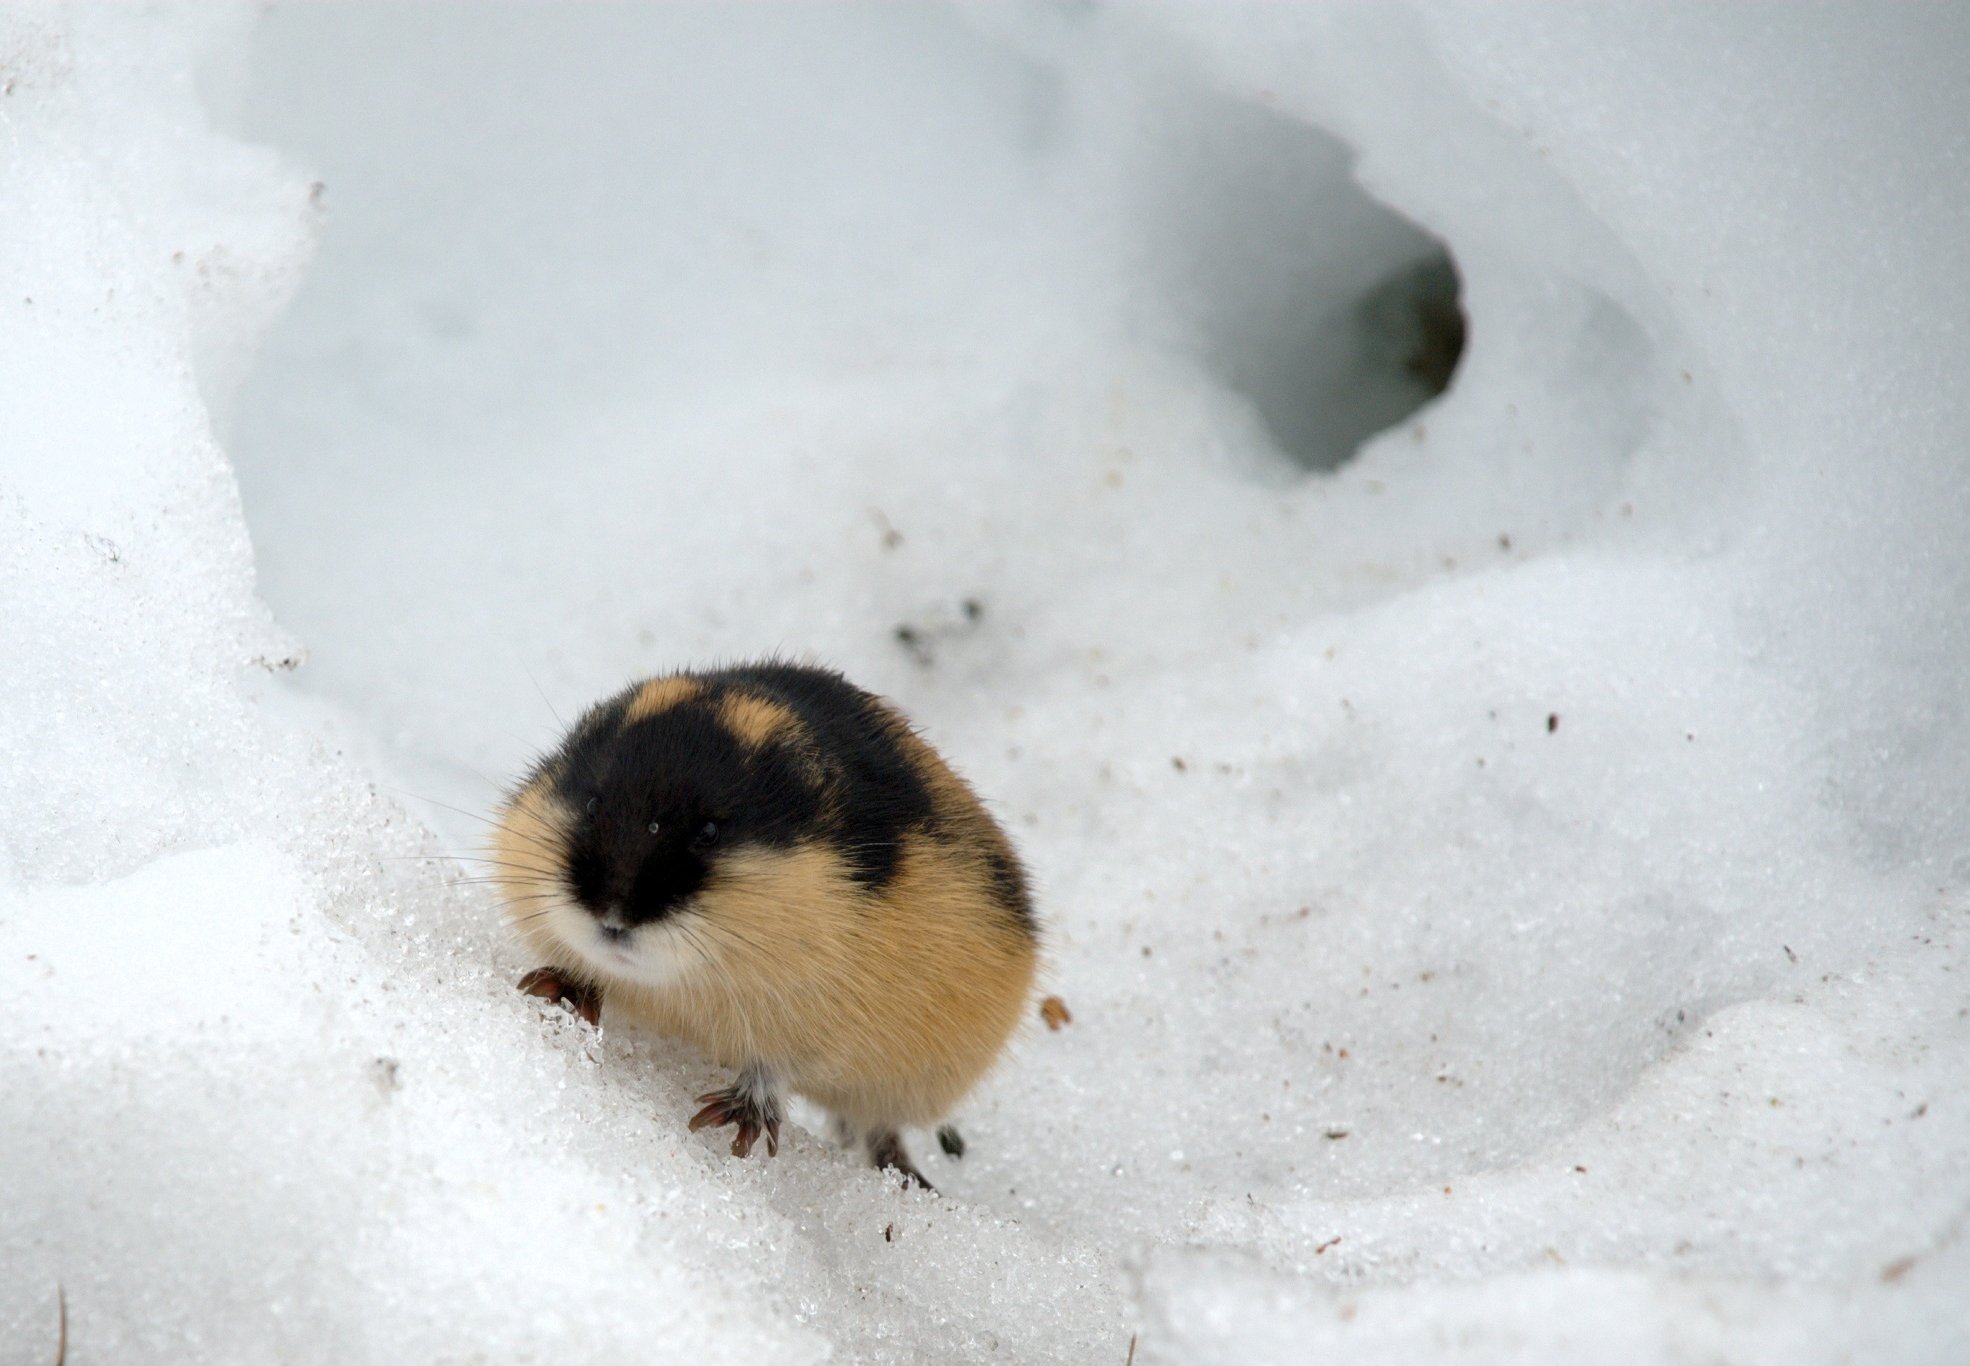 lemming_kgleditsch_Flickr-creativecommons